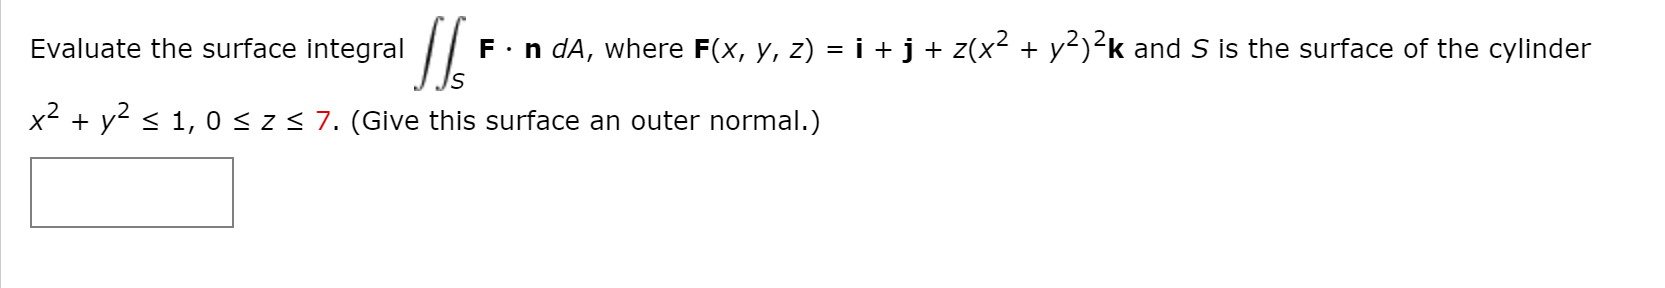 Evaluate the surface integral
F.n dA, where F(x, y, z) = i + j + z(x² + y²)<k and S is the surface of the cylinder
x2 + y2 < 1, 0 <z< 7. (Give this surface an outer normal.)
